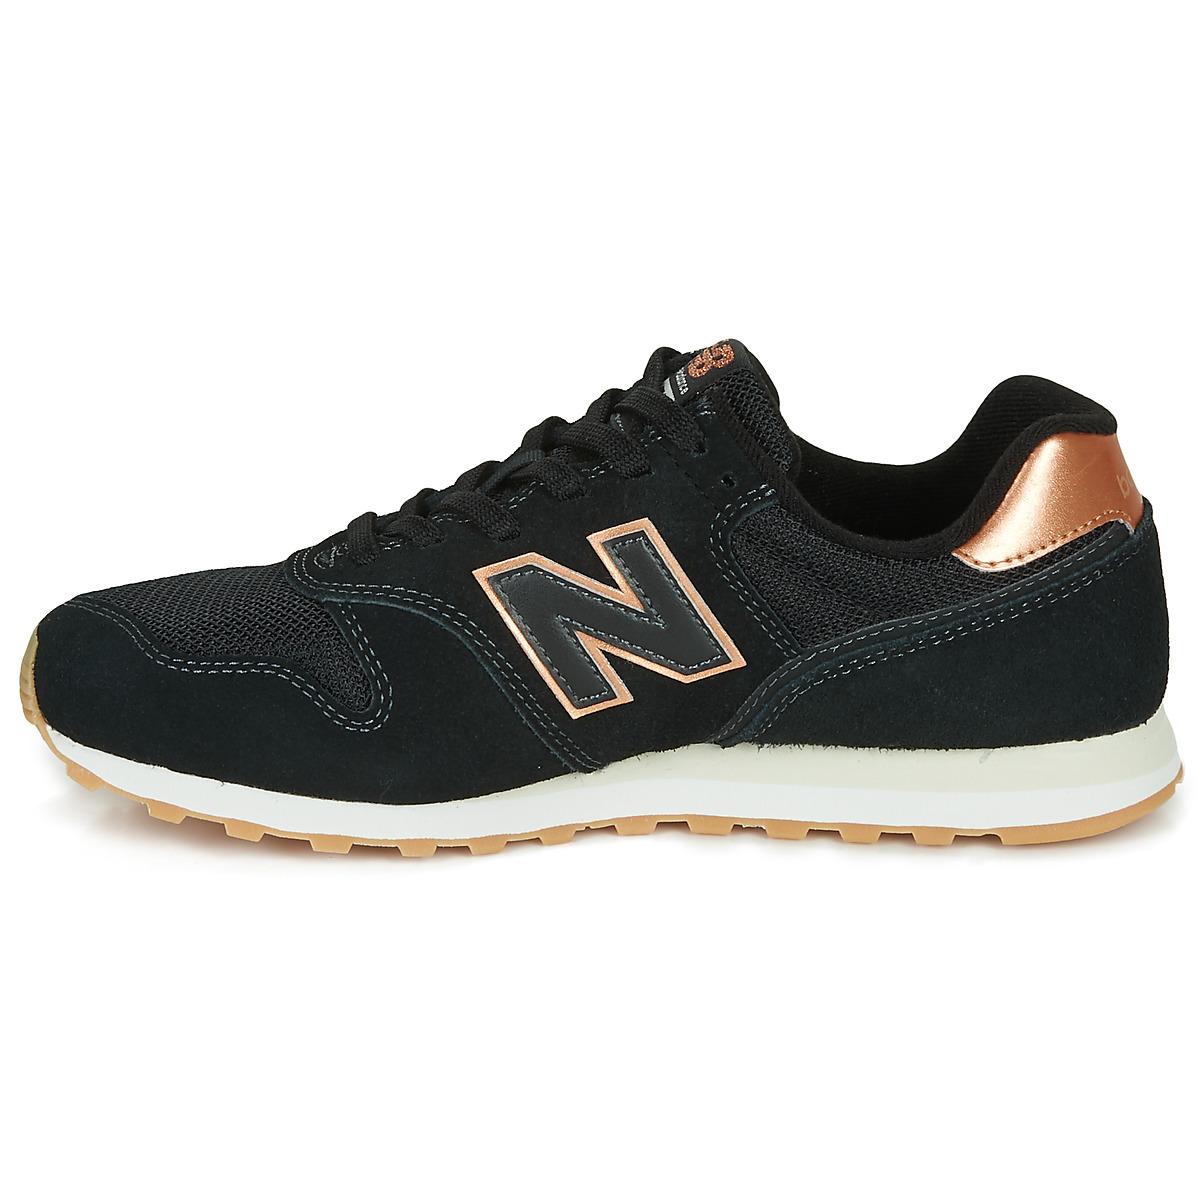 New Balance Black And Rose Gold Trainers Finland, SAVE 51% - aveclumiere.com